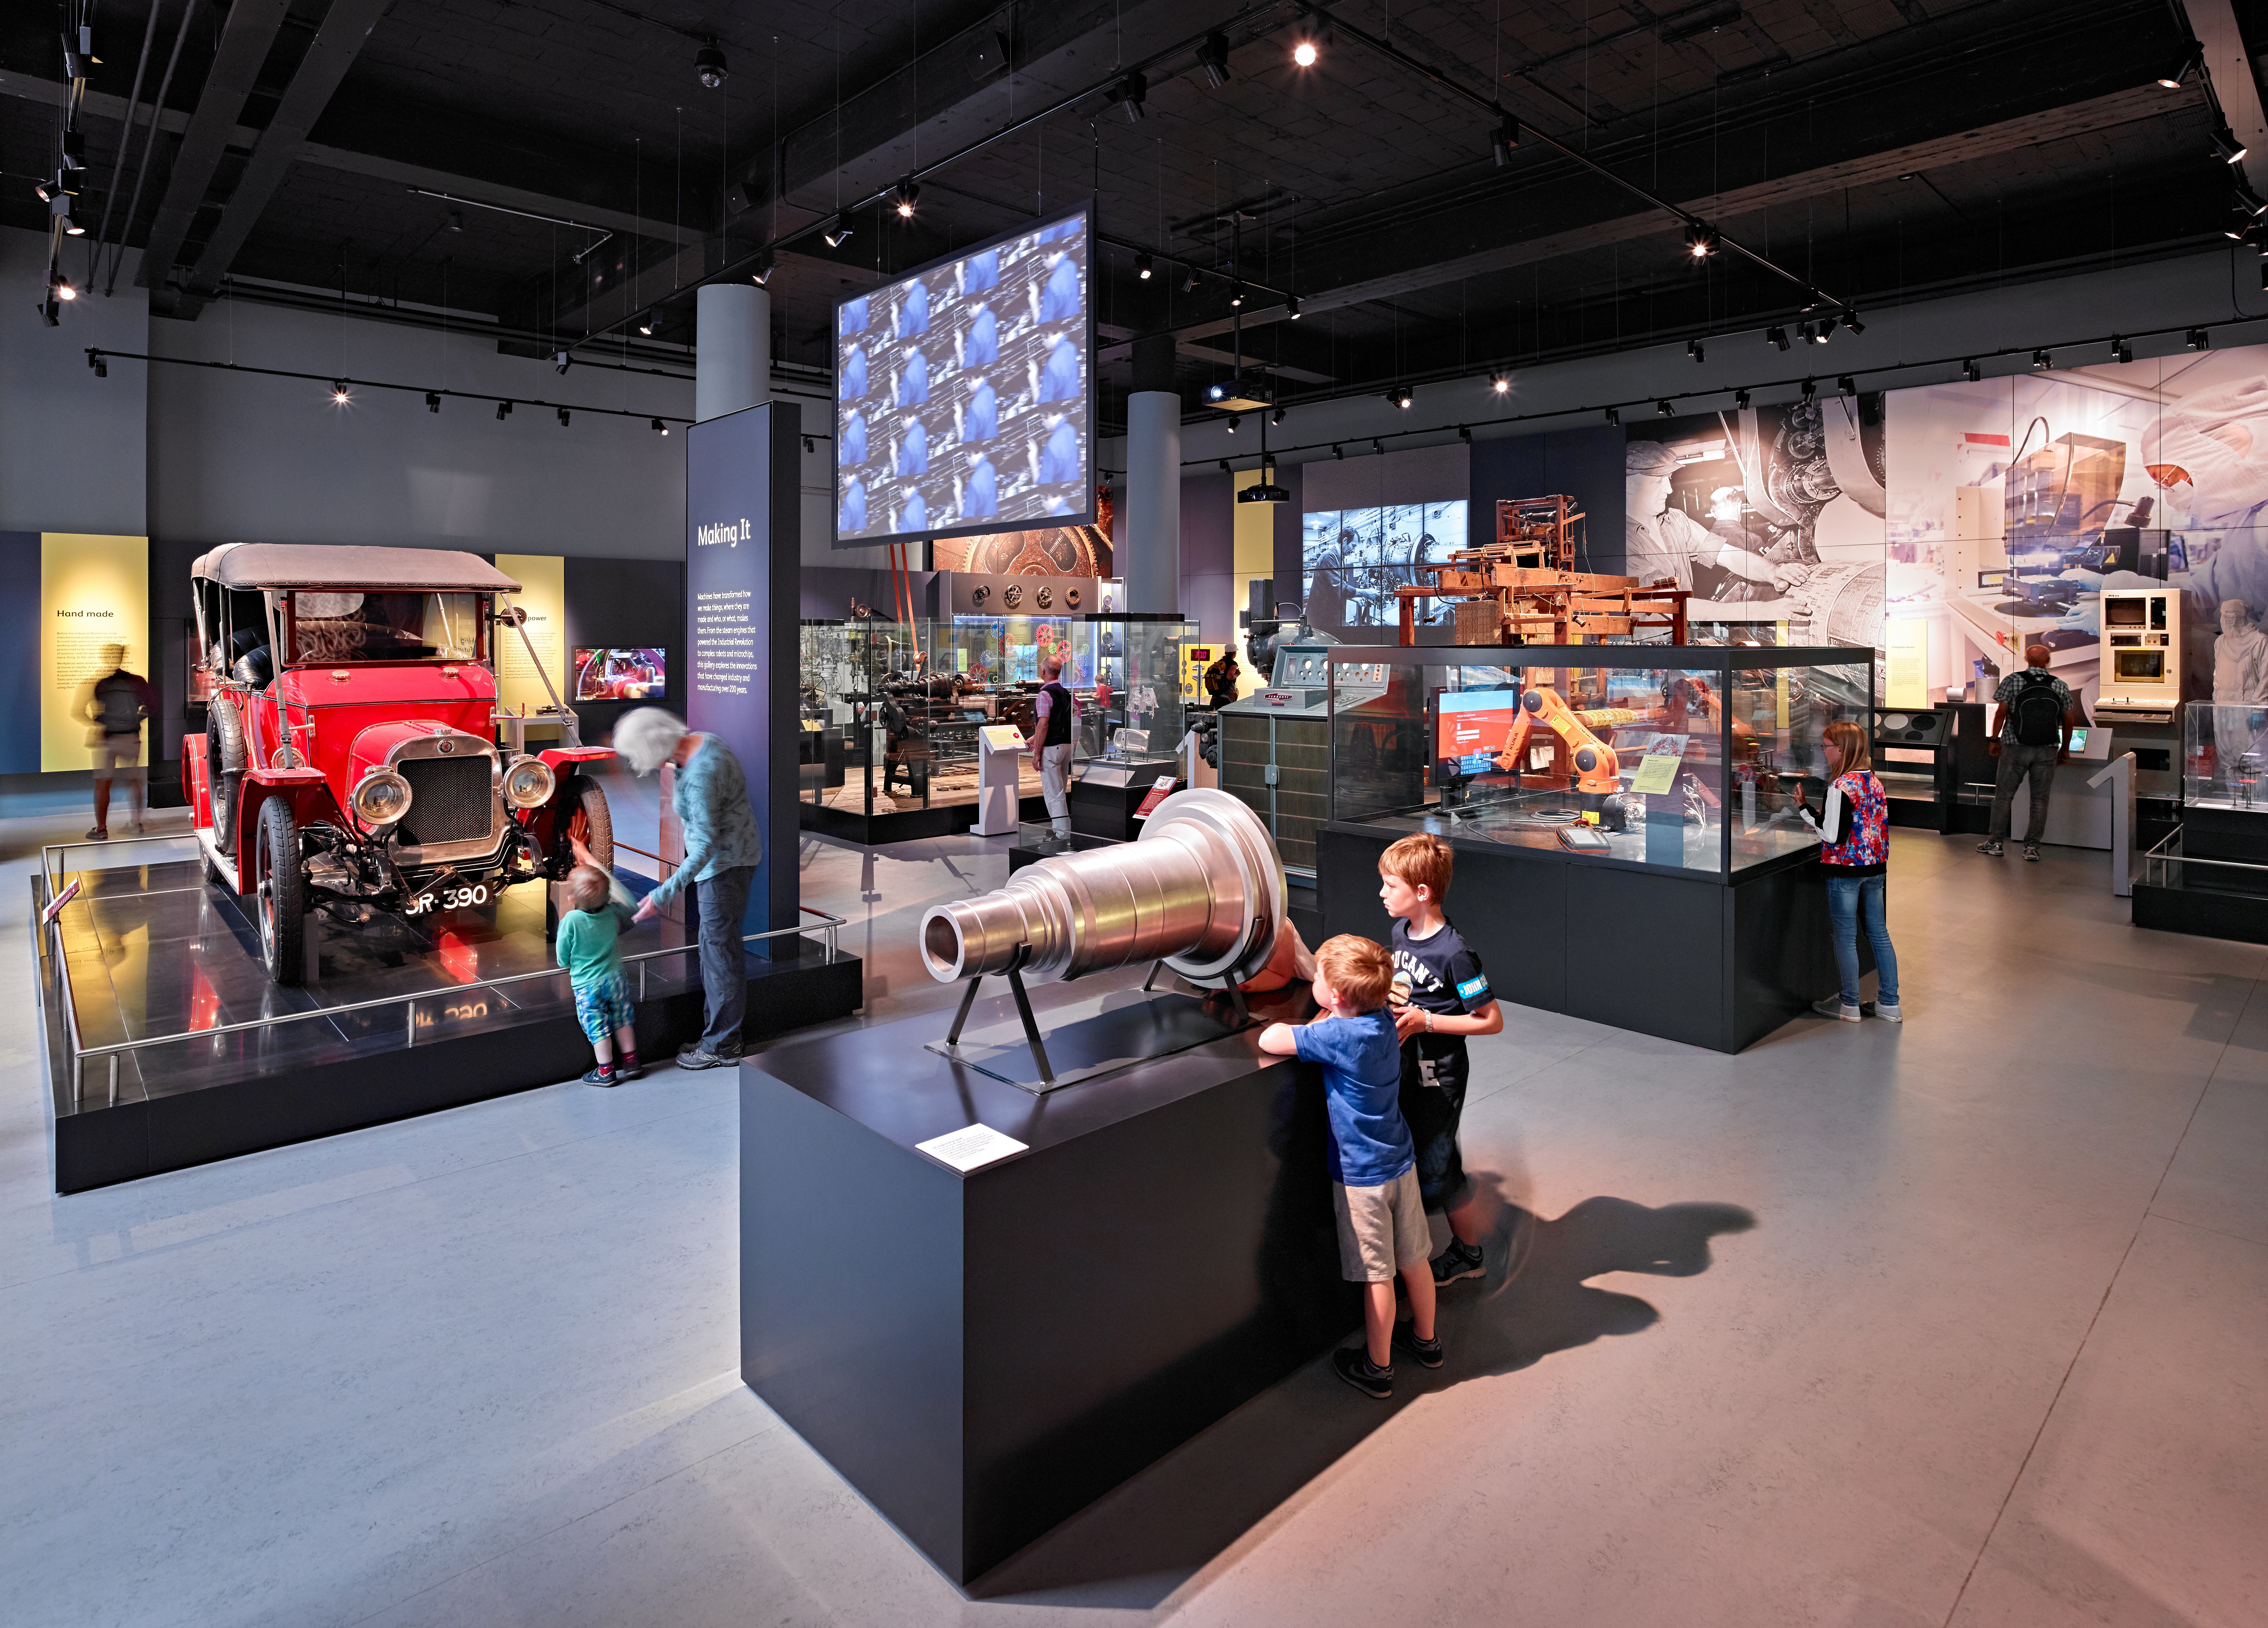 A number of visitors play with interactives and enjoy objects across the Making It gallery.